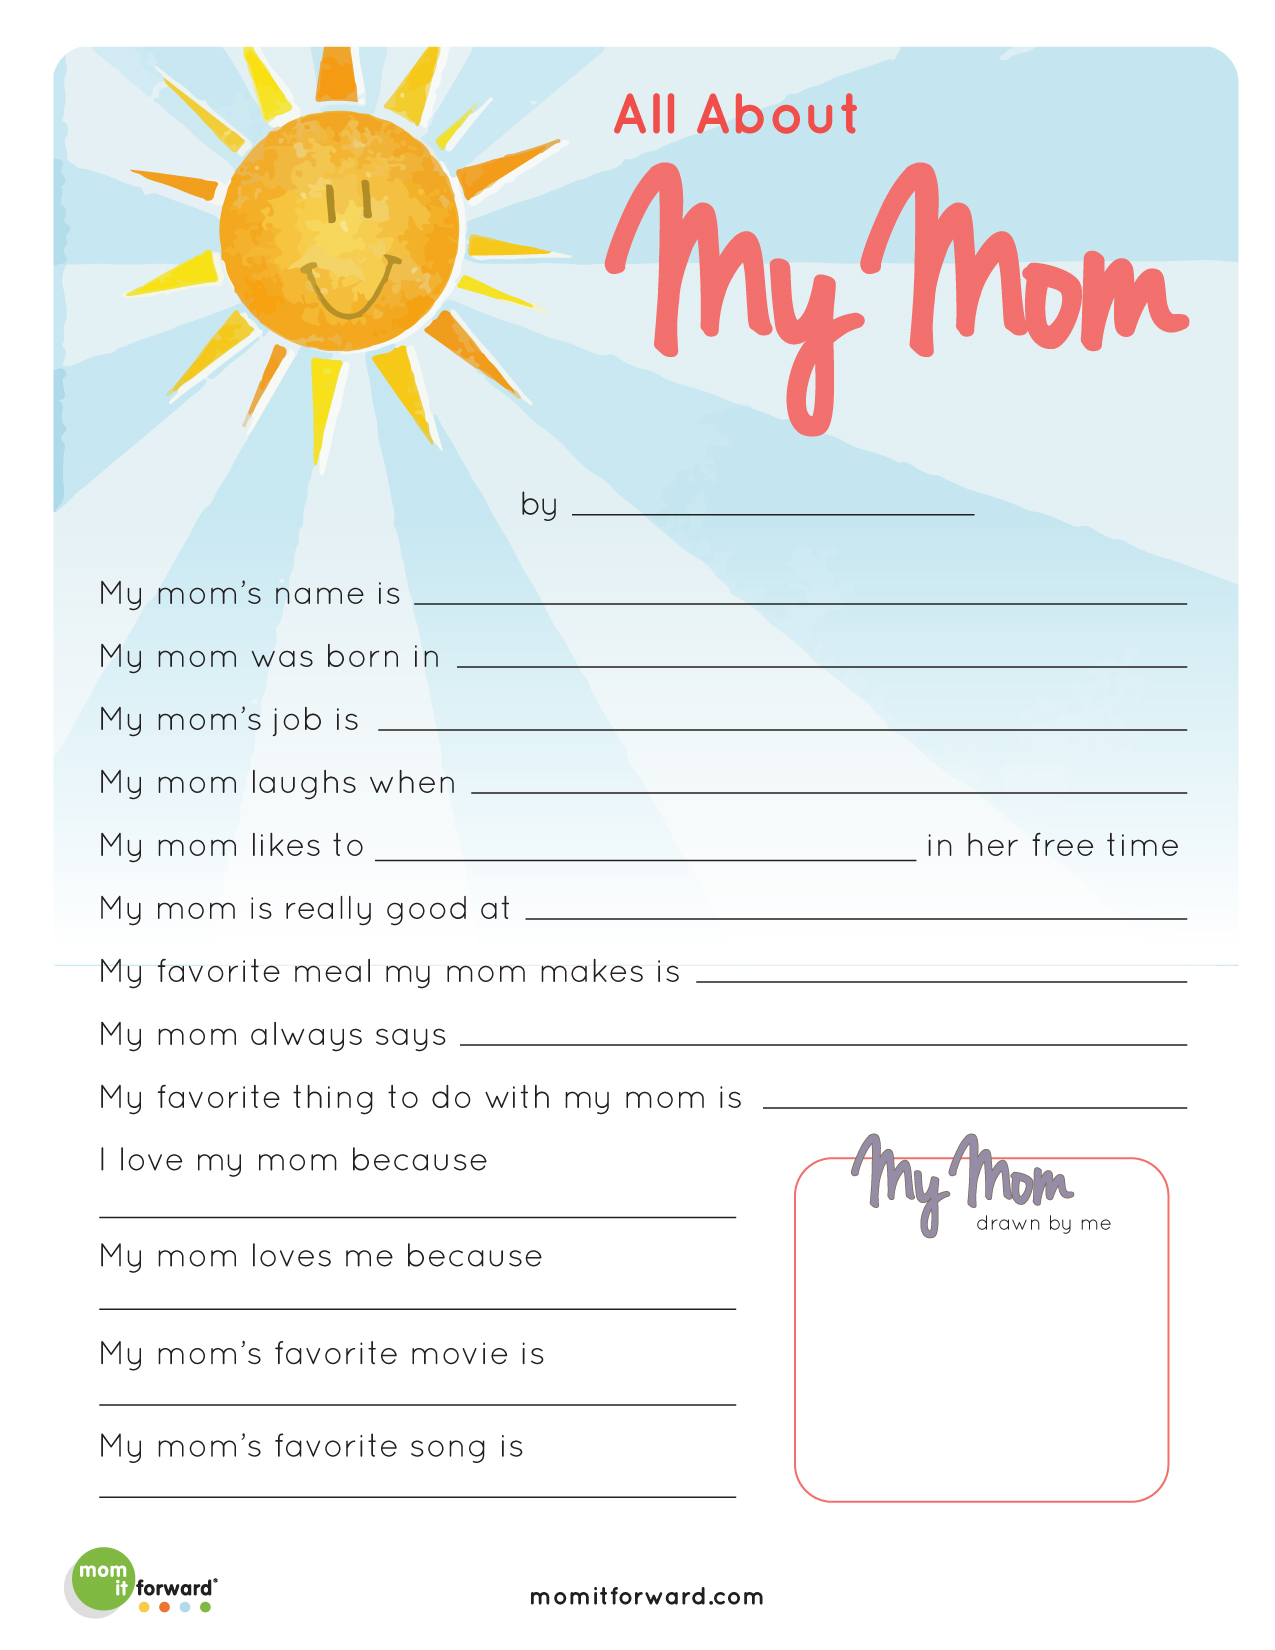 Mother s Day All About My Mom Printable Mom It ForwardMom It Forward